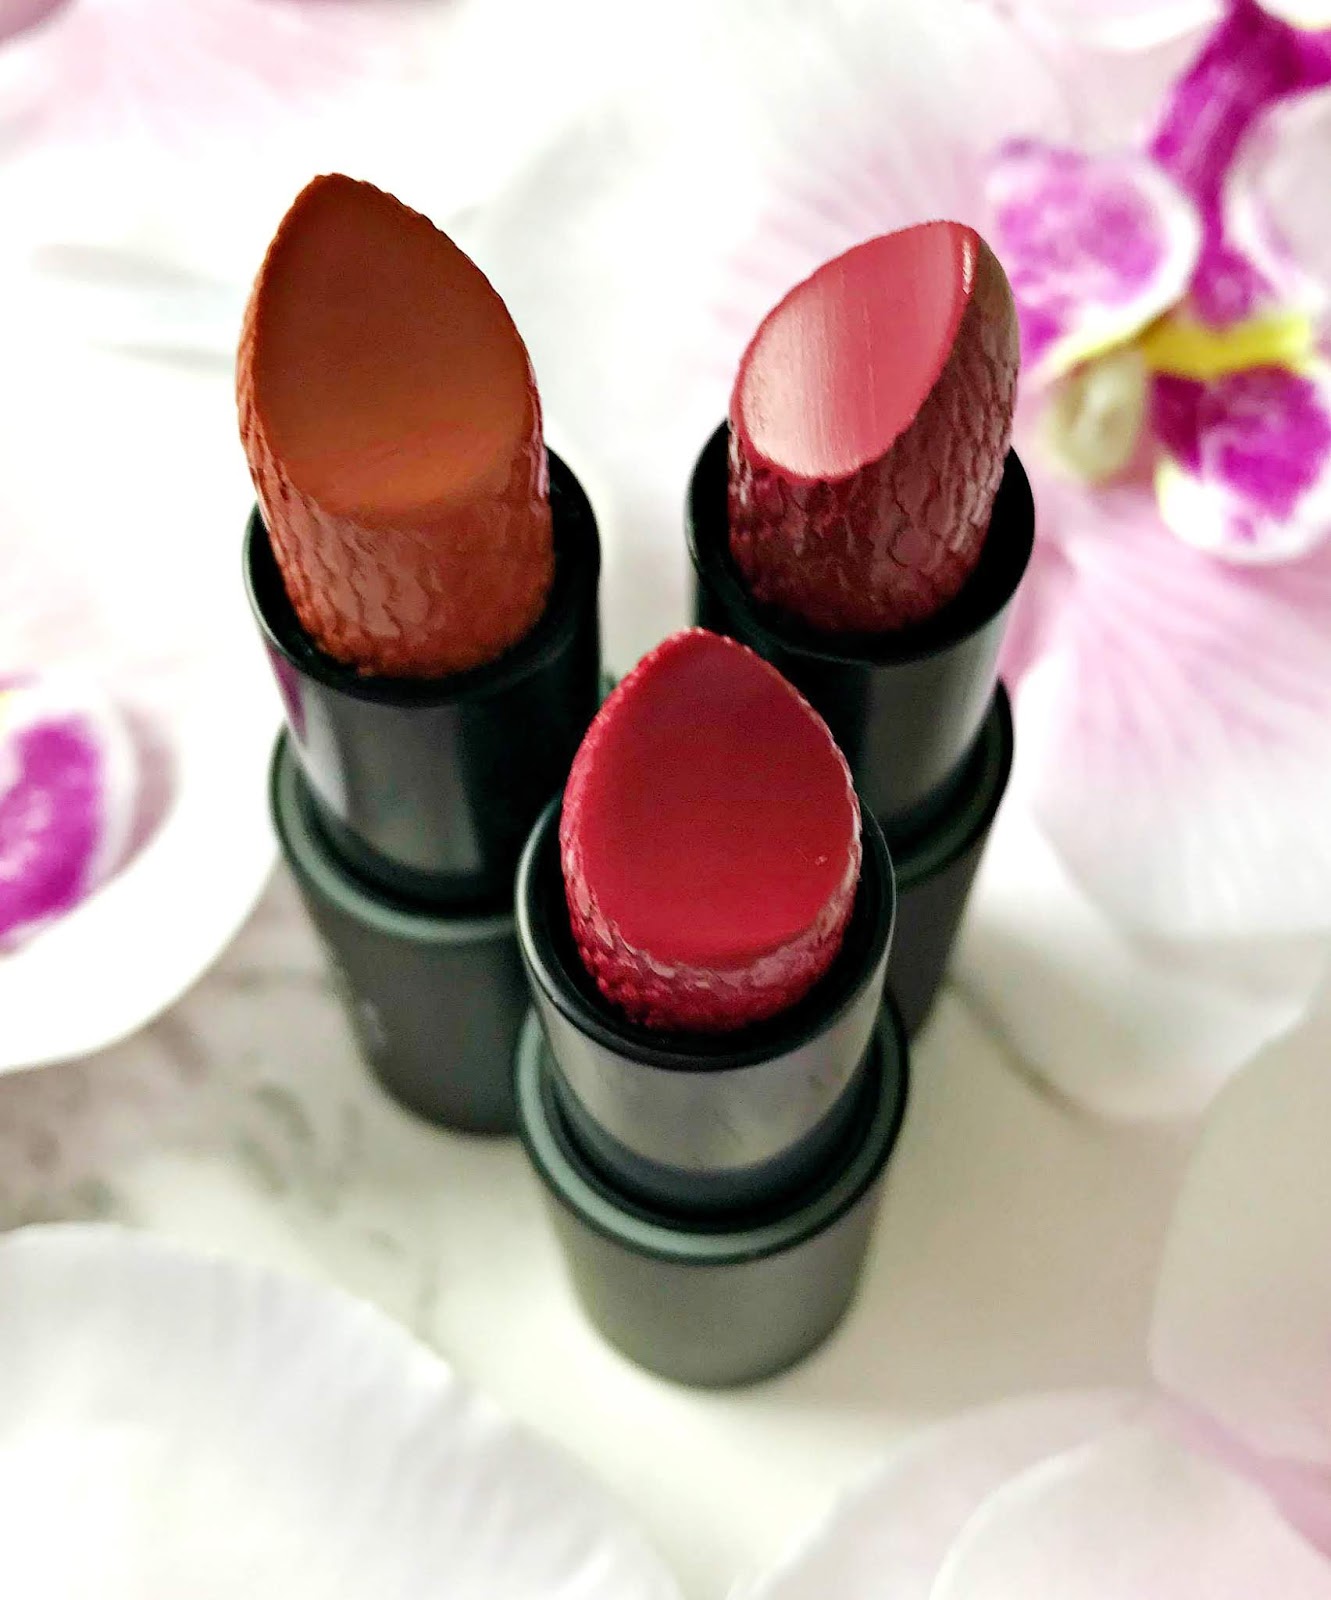 Laura Geller Iconic Baked Sculpting Lipstick Review & Swatches